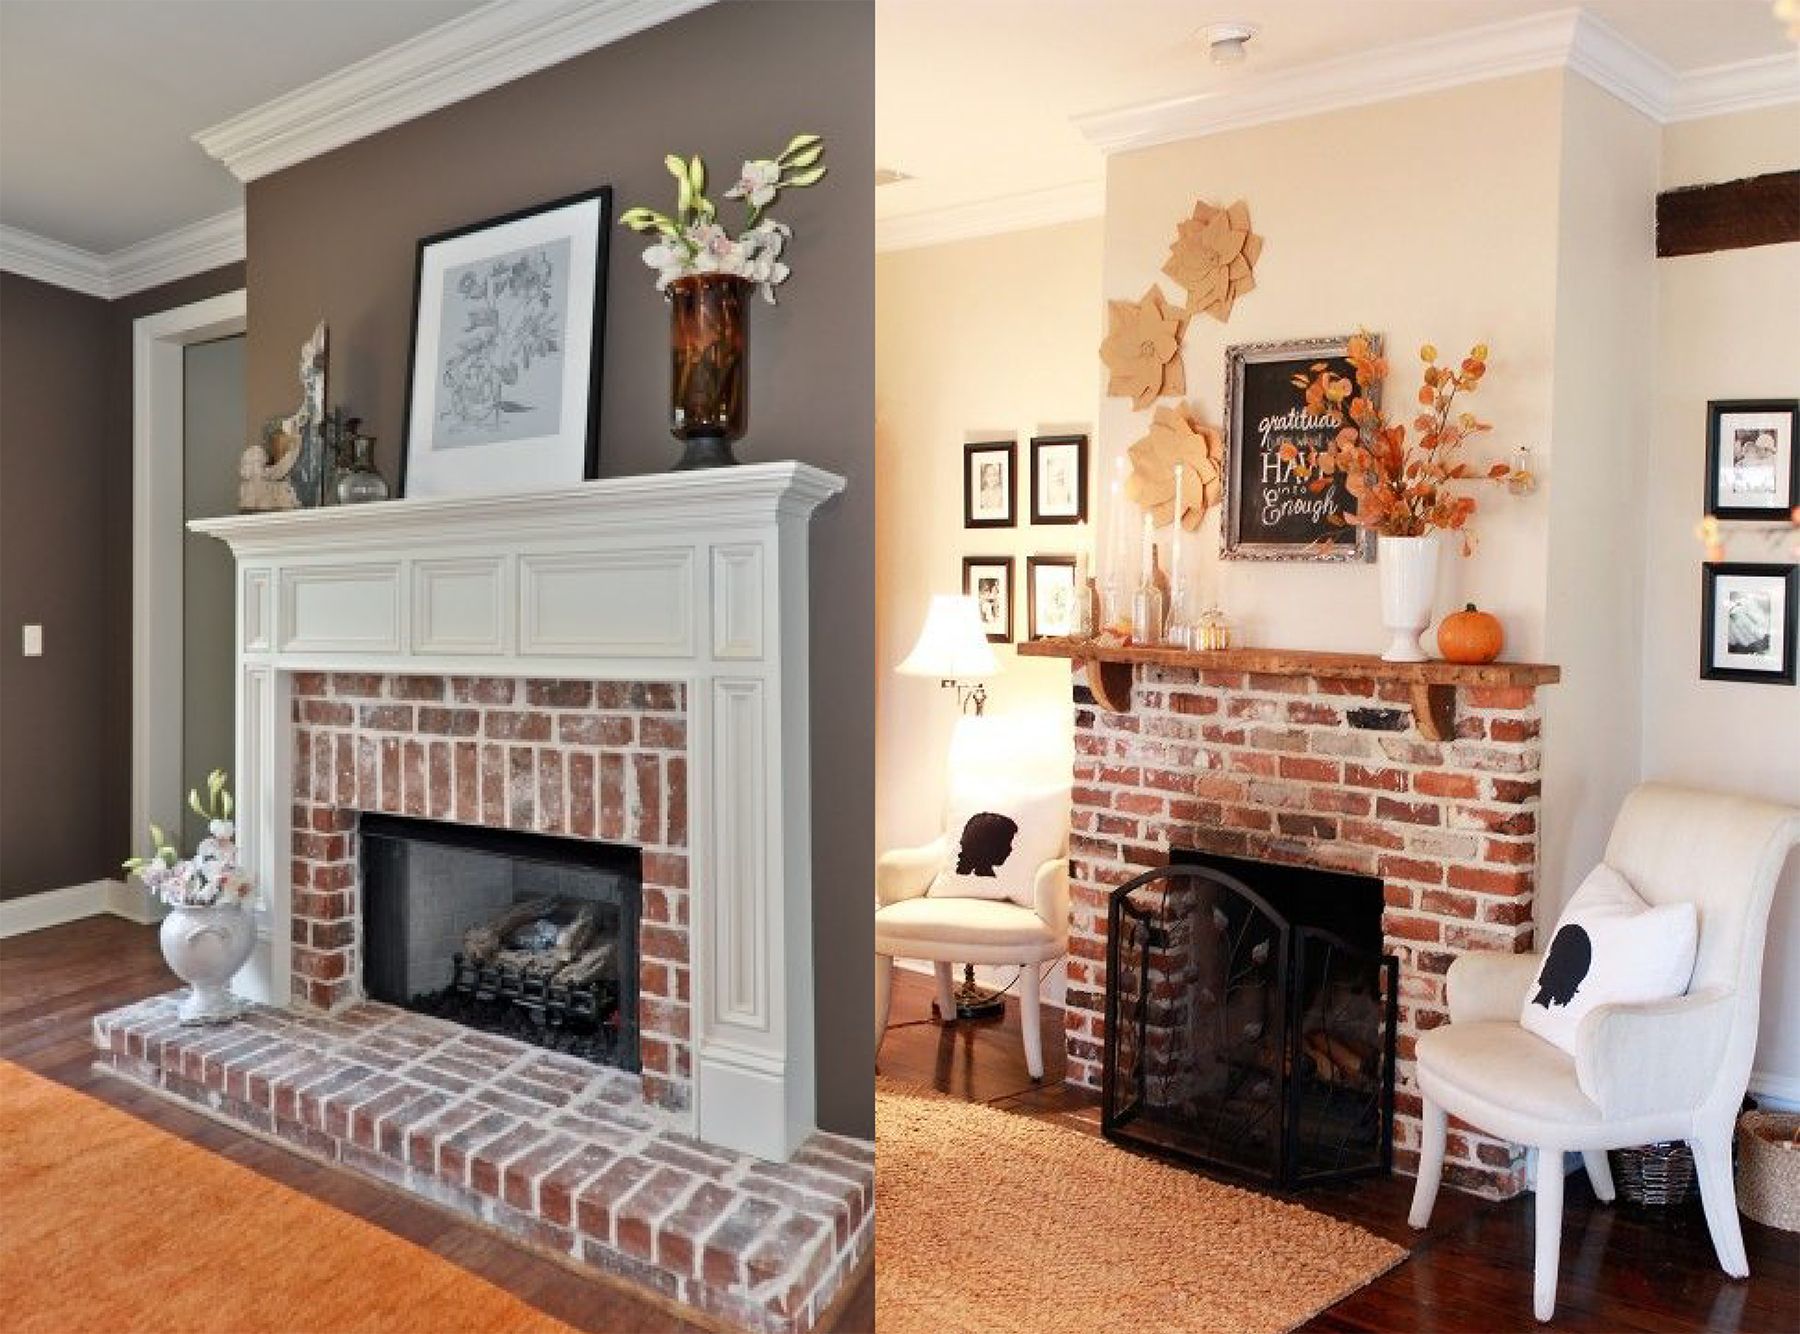 How to Build A Brick Fireplace Best Of Exposed Brick Fireplace Almond Home In 2019